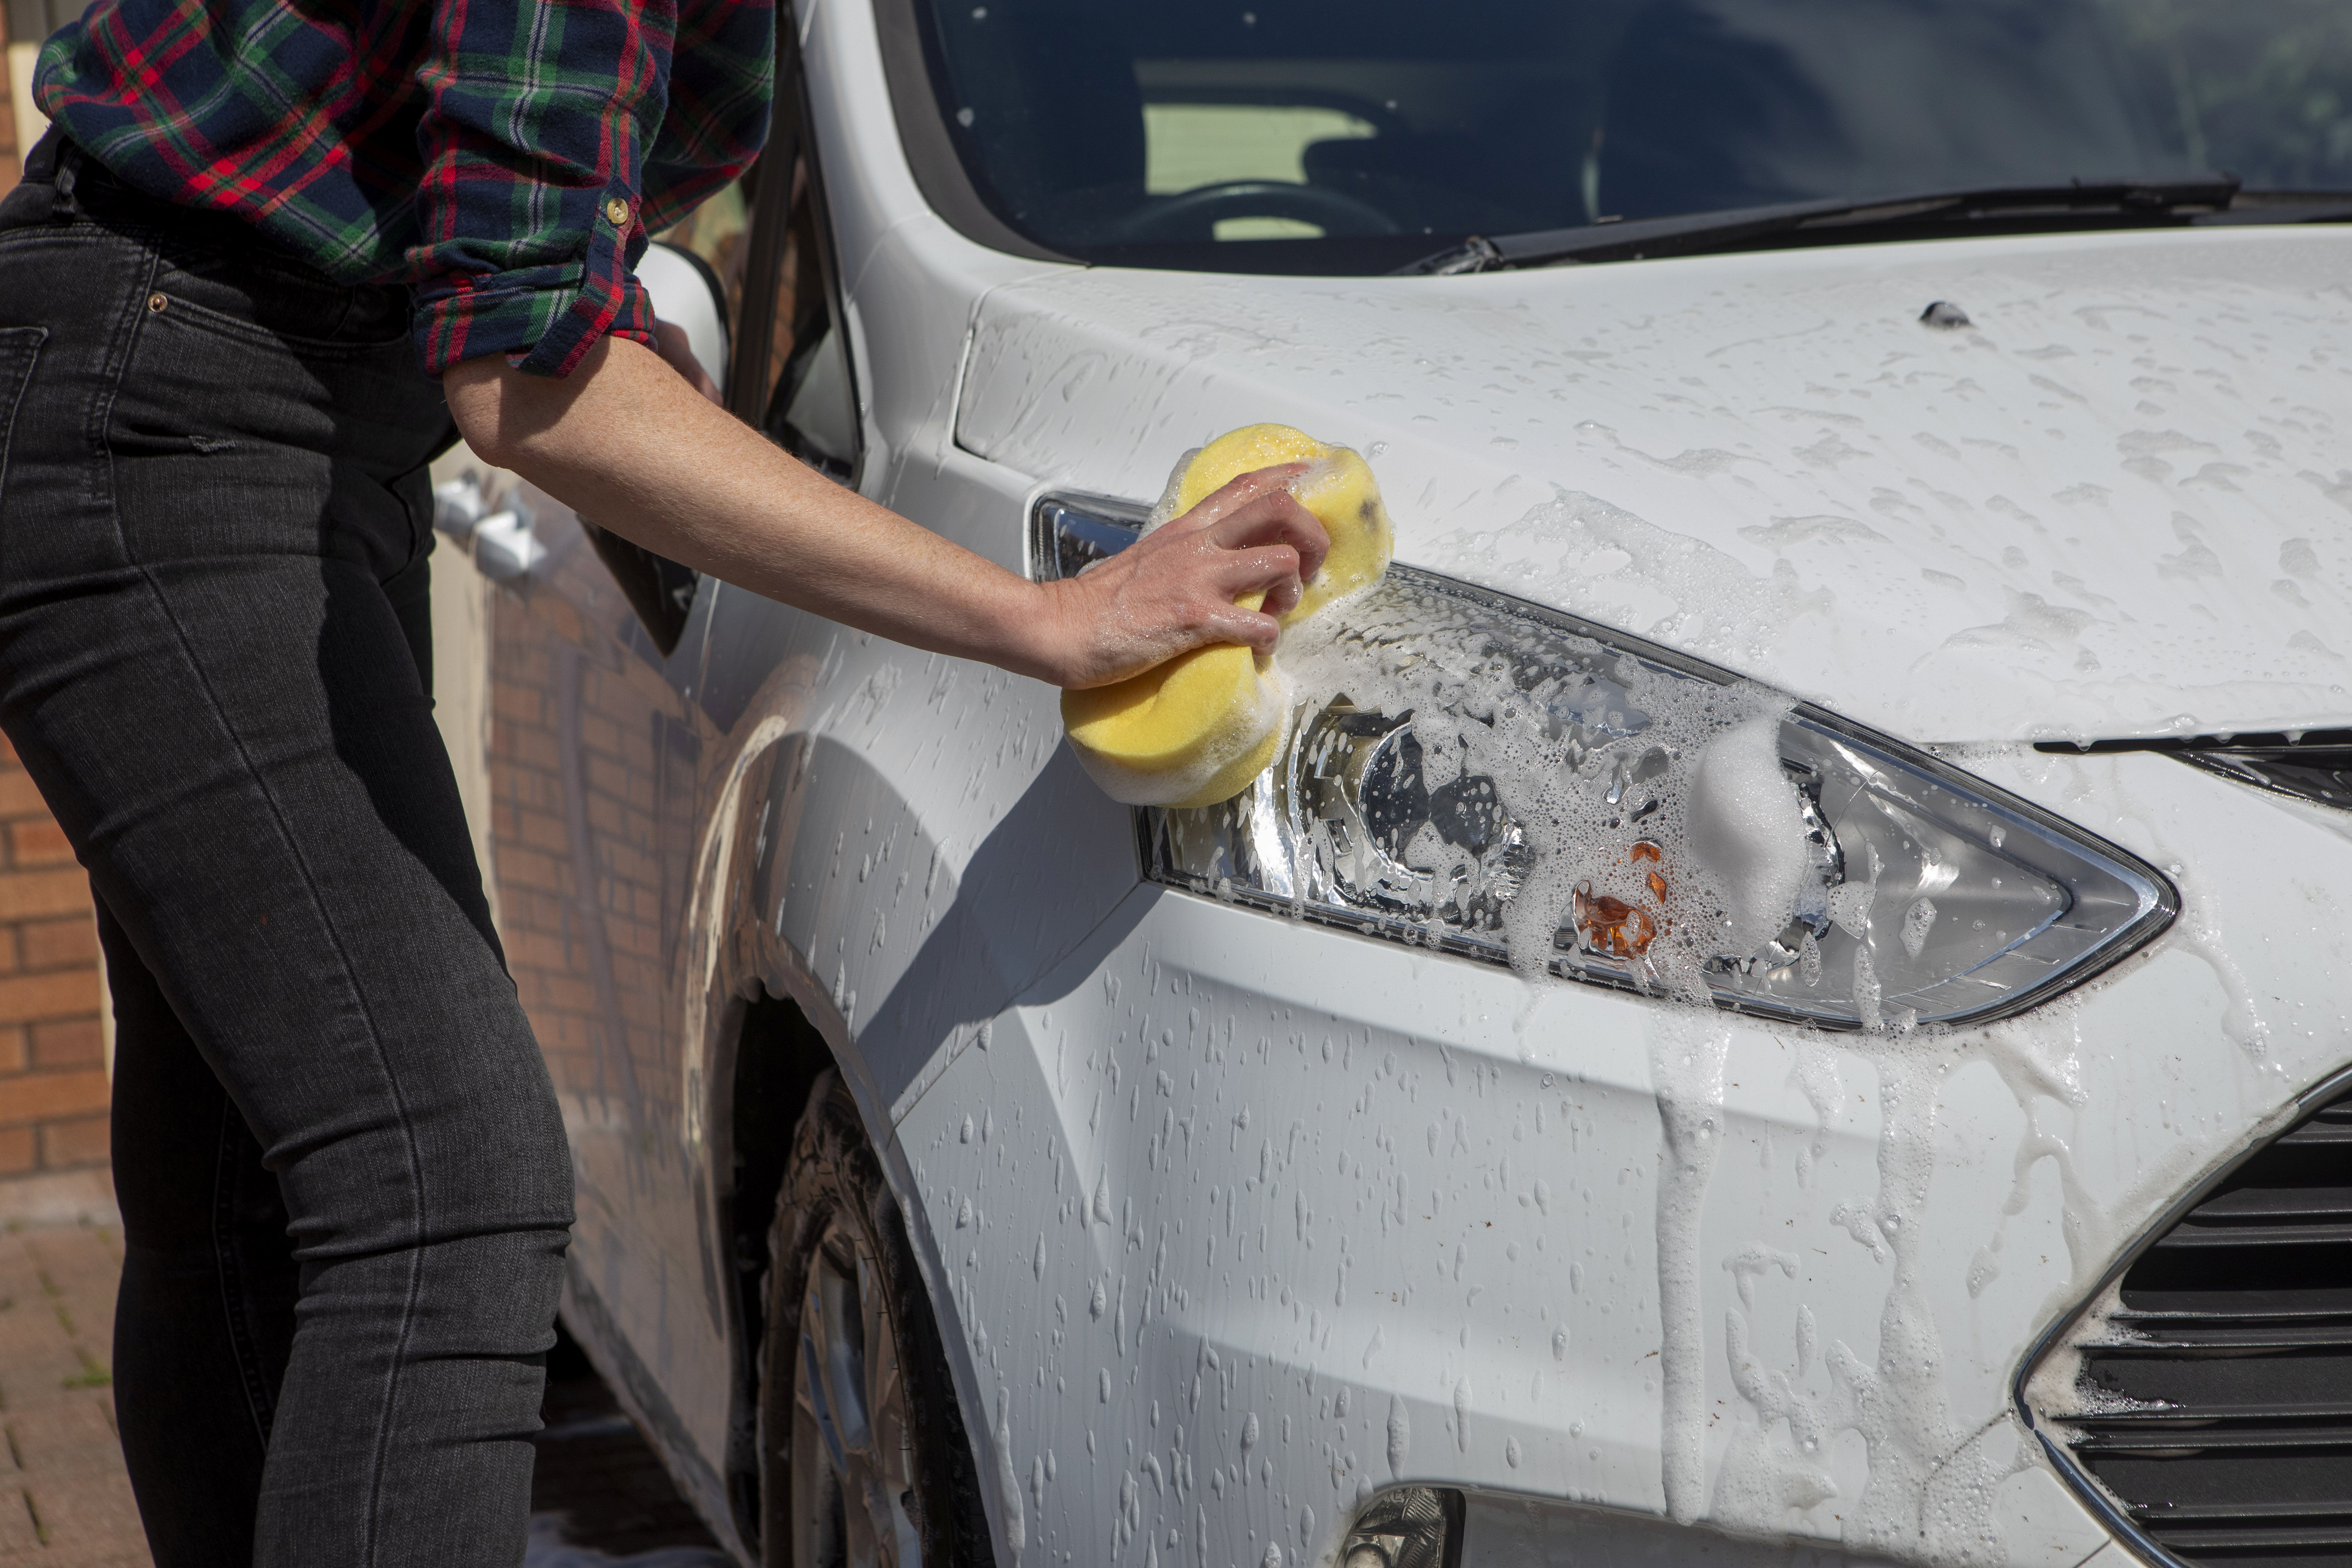 A poll of 2,000 drivers found many have stopped using professional car wash services during the past 12 months